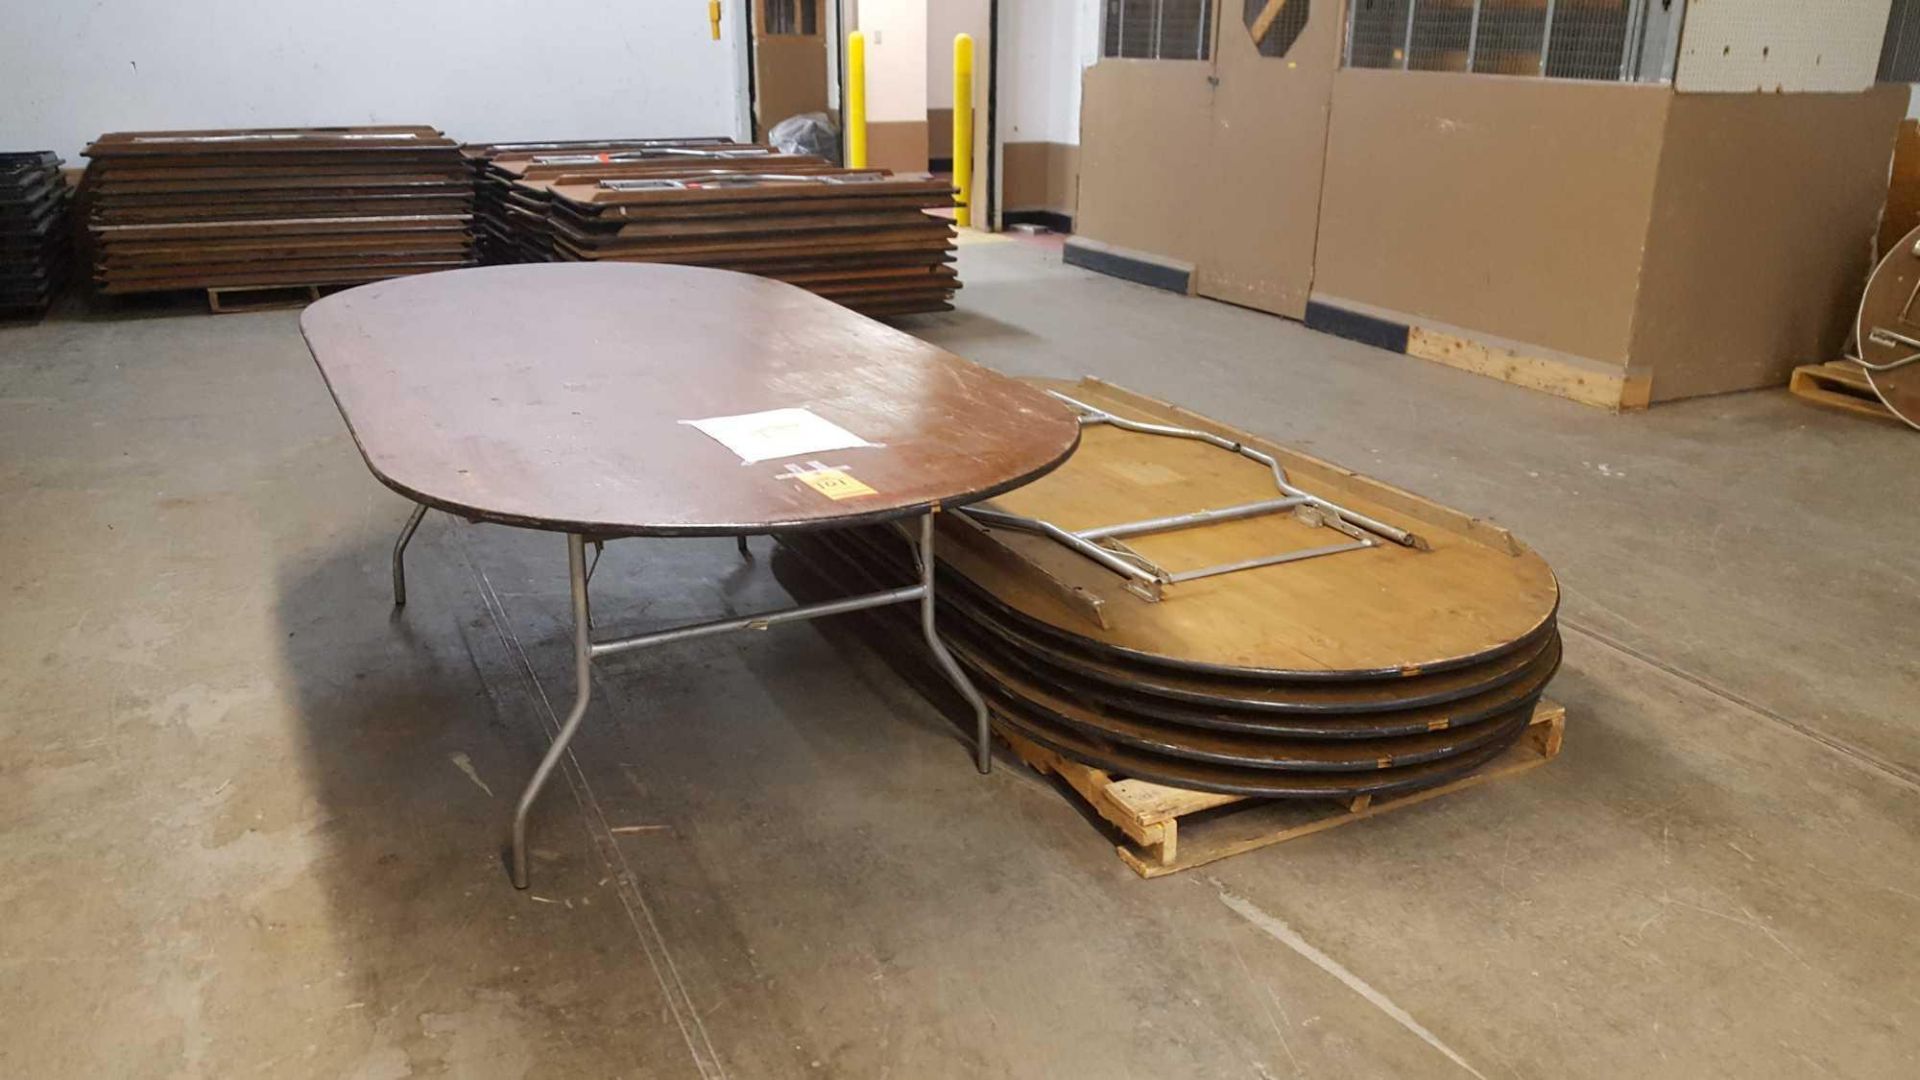 Lot of (6) Palmer racetrack tables, oval 84 inch by 48 inch by 30 in, with folding legs.